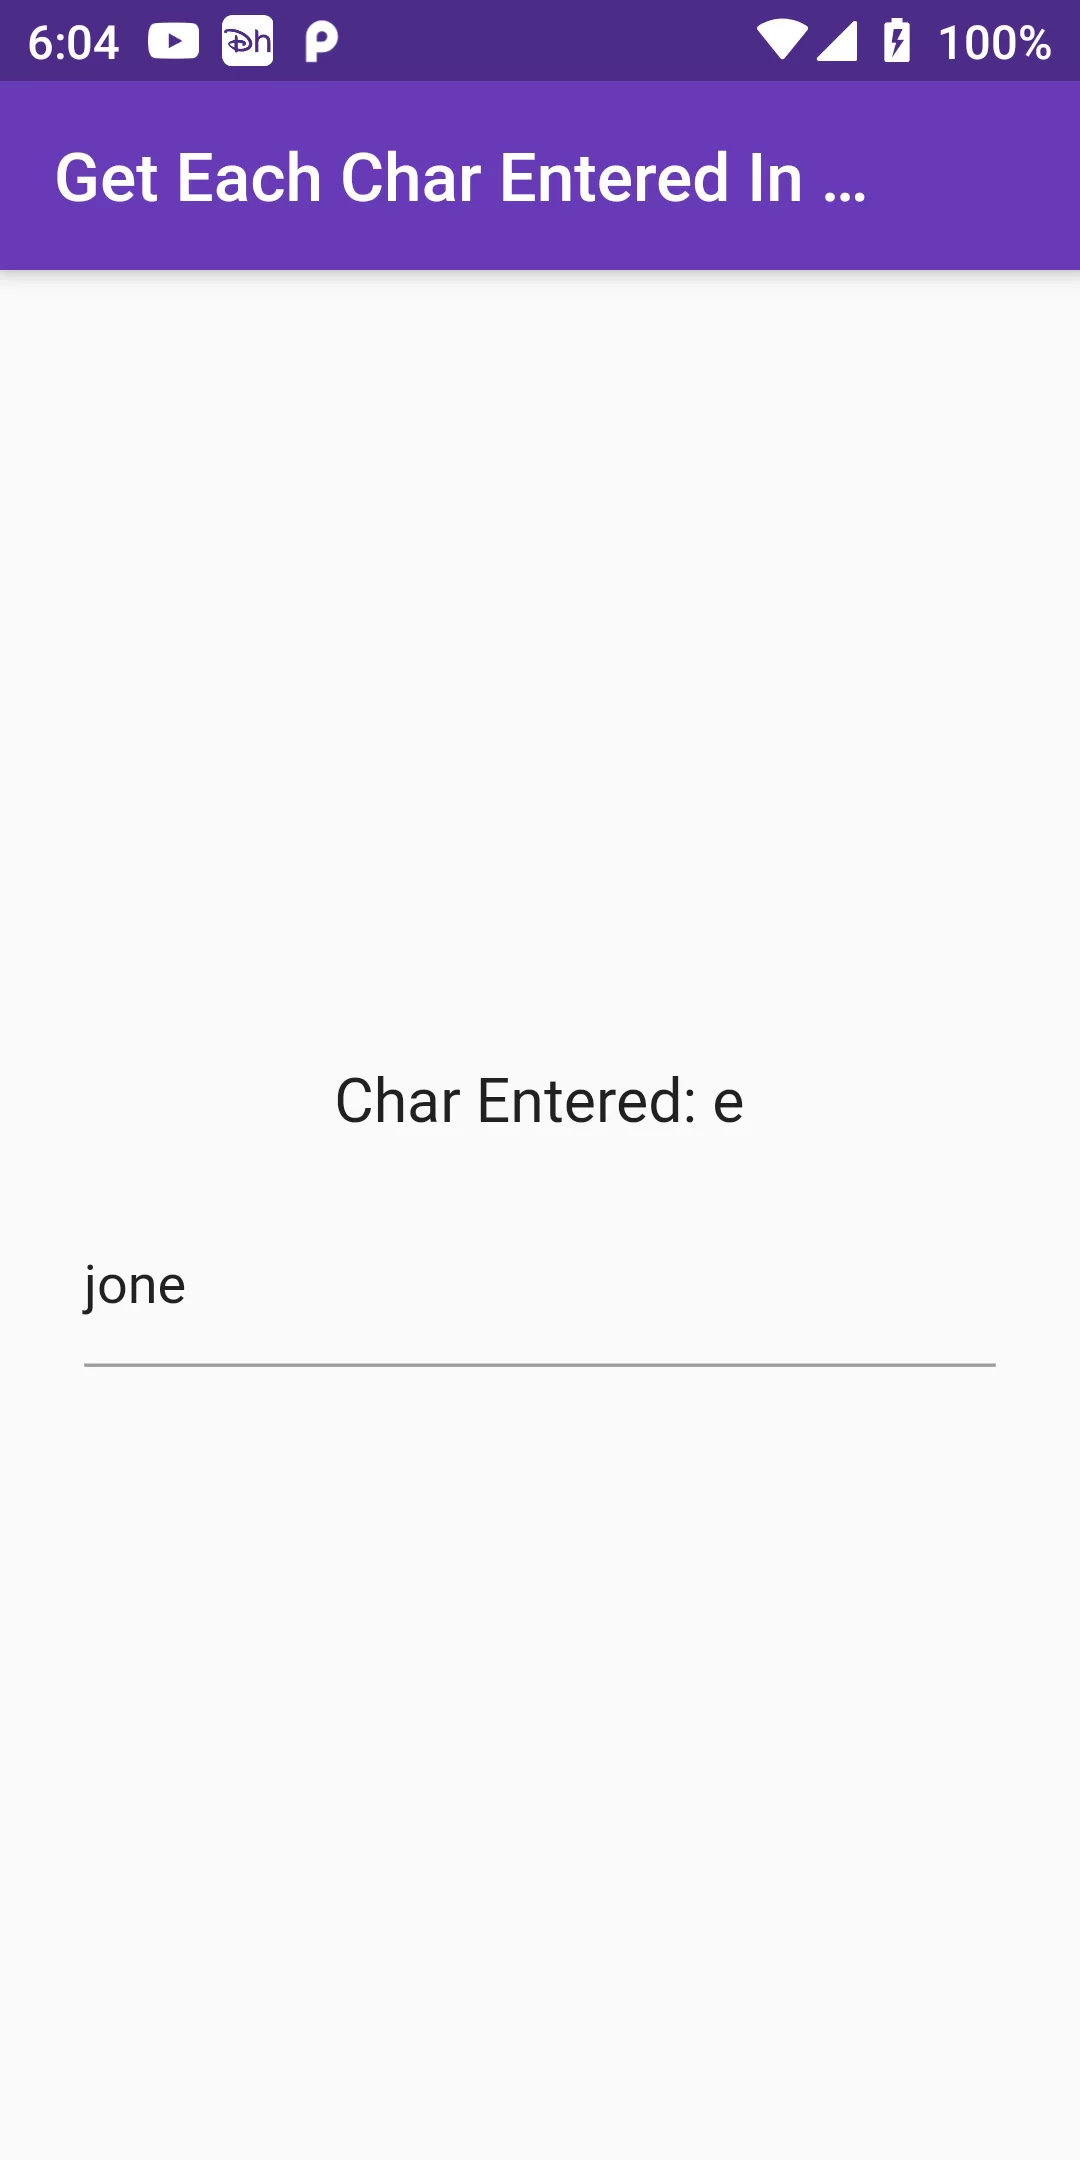 How To Get Each Character Entered In Text Field In Flutter App